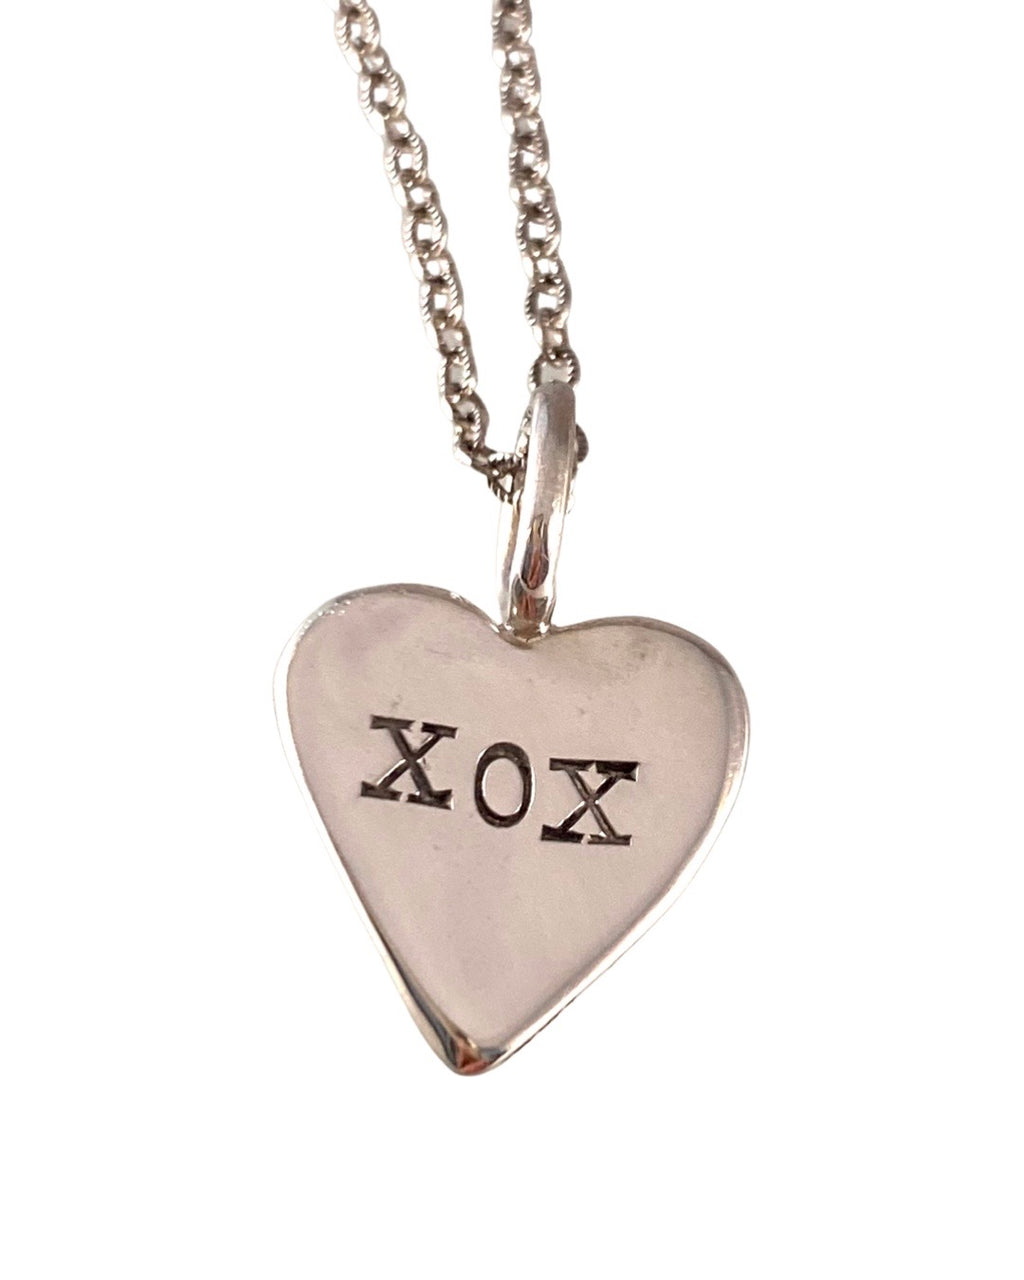 XOX Stamped Heart Necklace